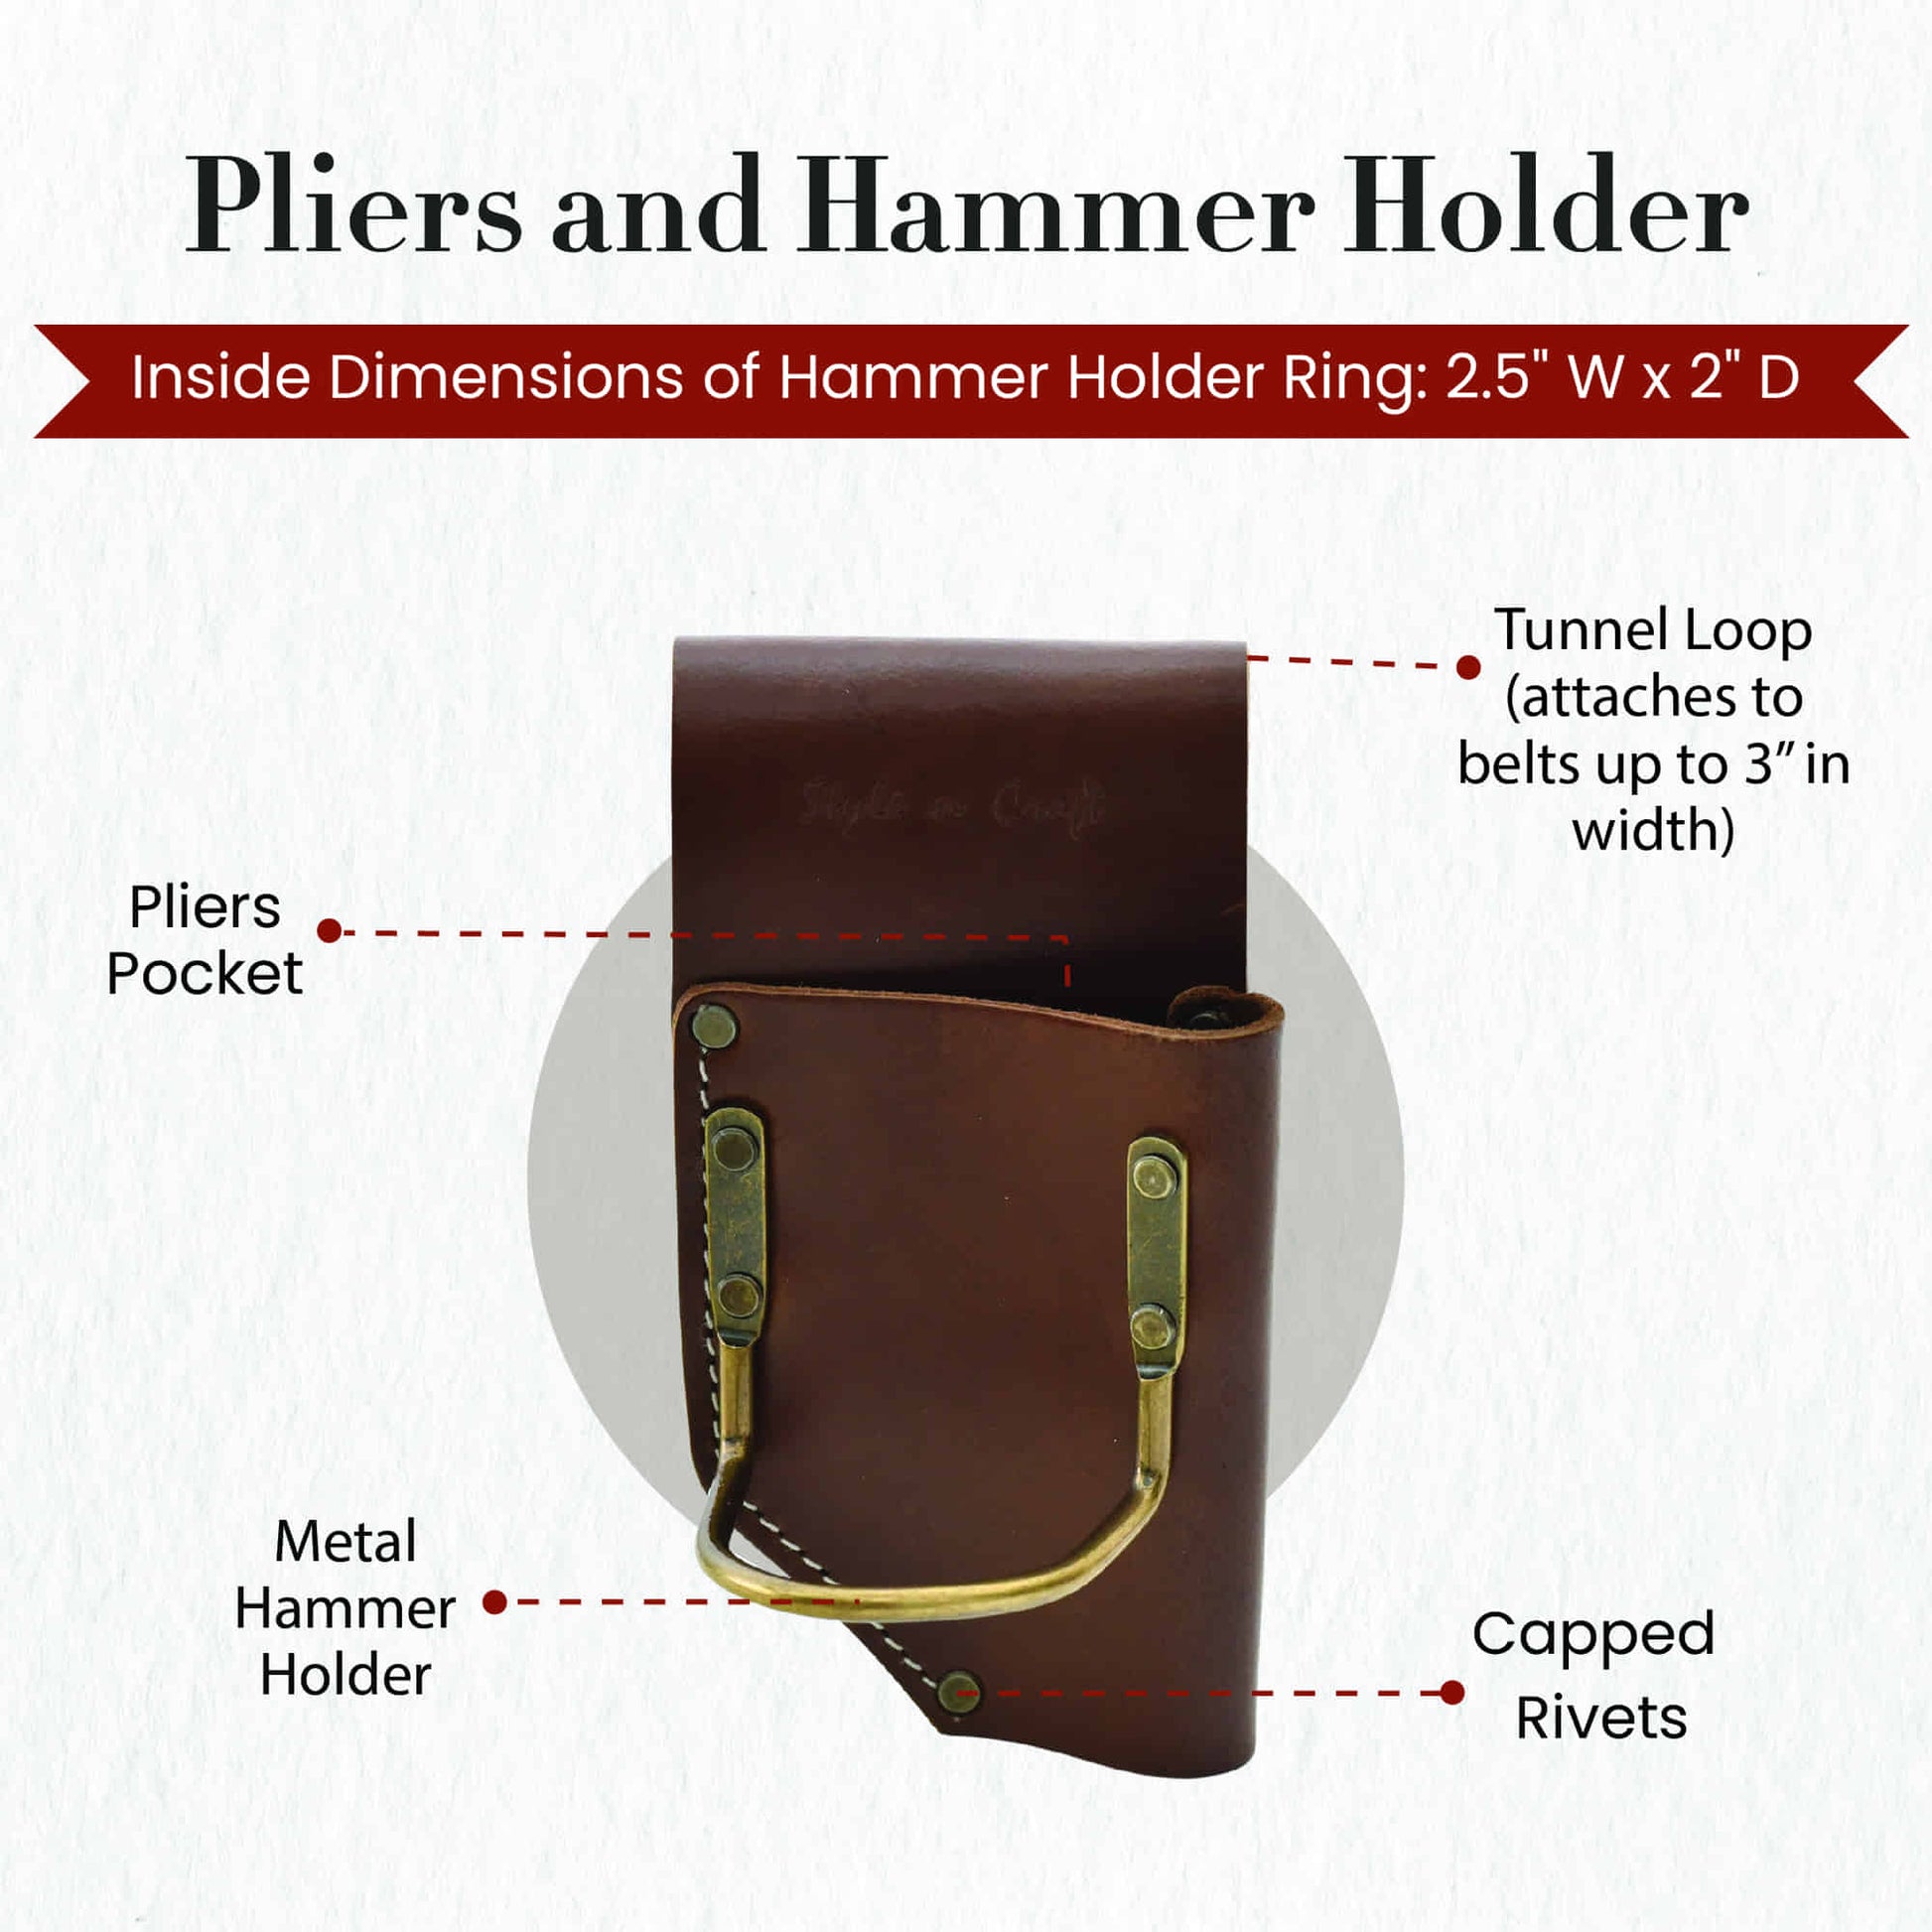 Style n Craft's 98450 - Pliers and Hammer Holder in Heavy Dark Tan Top Grain Leather - Front View Showing Details